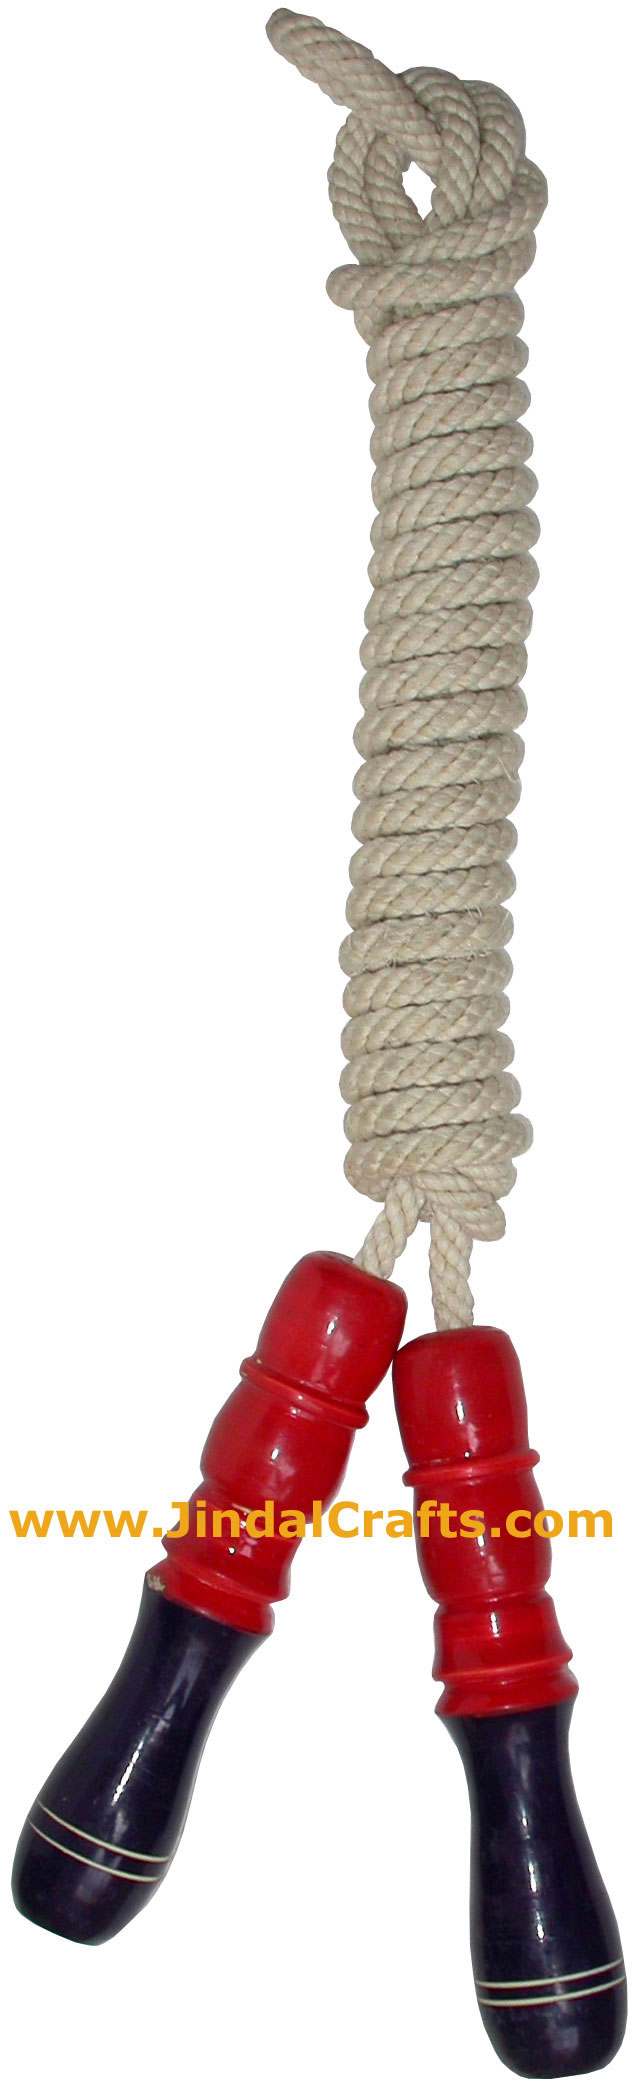 Lacquered Polished Wooden Skipping Rope